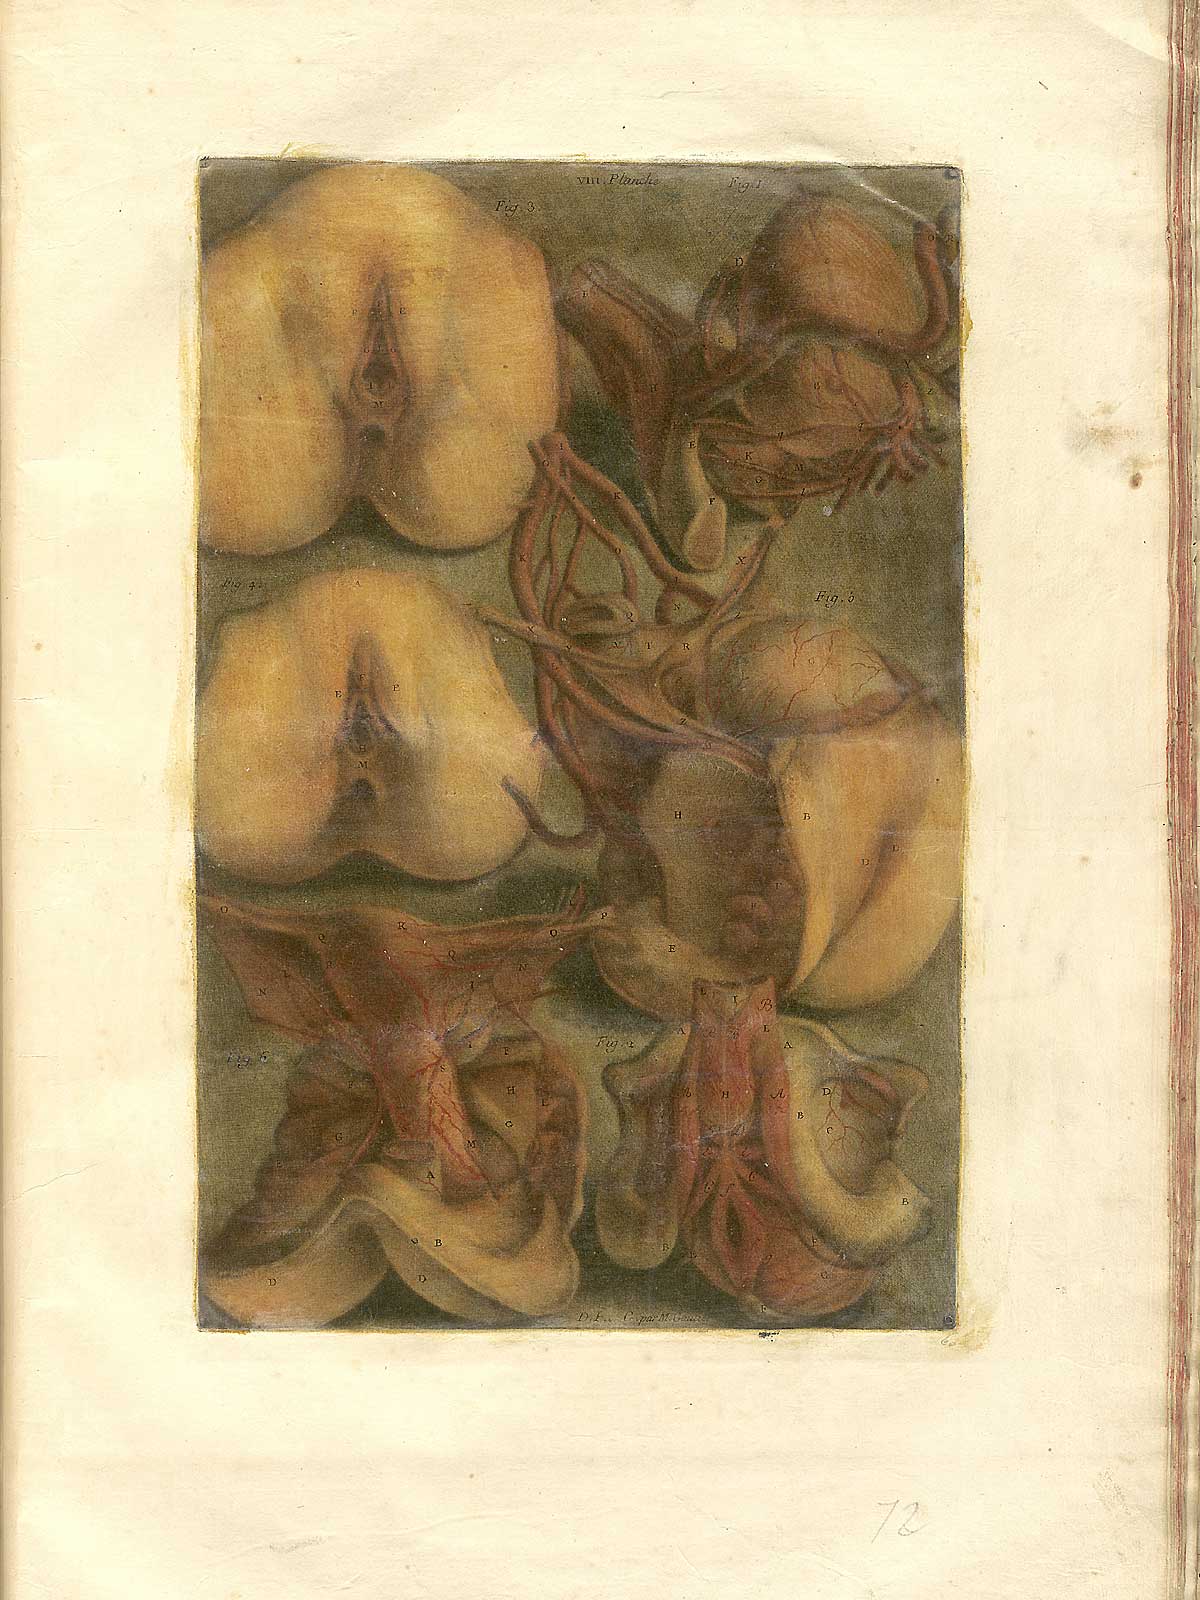 Color mezzotint of six figures showing the female reproductive system; on the left from top to bottom are two images of the female genitalia and at bottom a view of the uterus and vagina from the interior; on the right fromtop to bottom are other interior views from varying angles; from Jacques Fabian Gautier d’Agoty’s Anatomie générale des viscères en situation, NLM Call no.: WZ 260 G283c 1745.